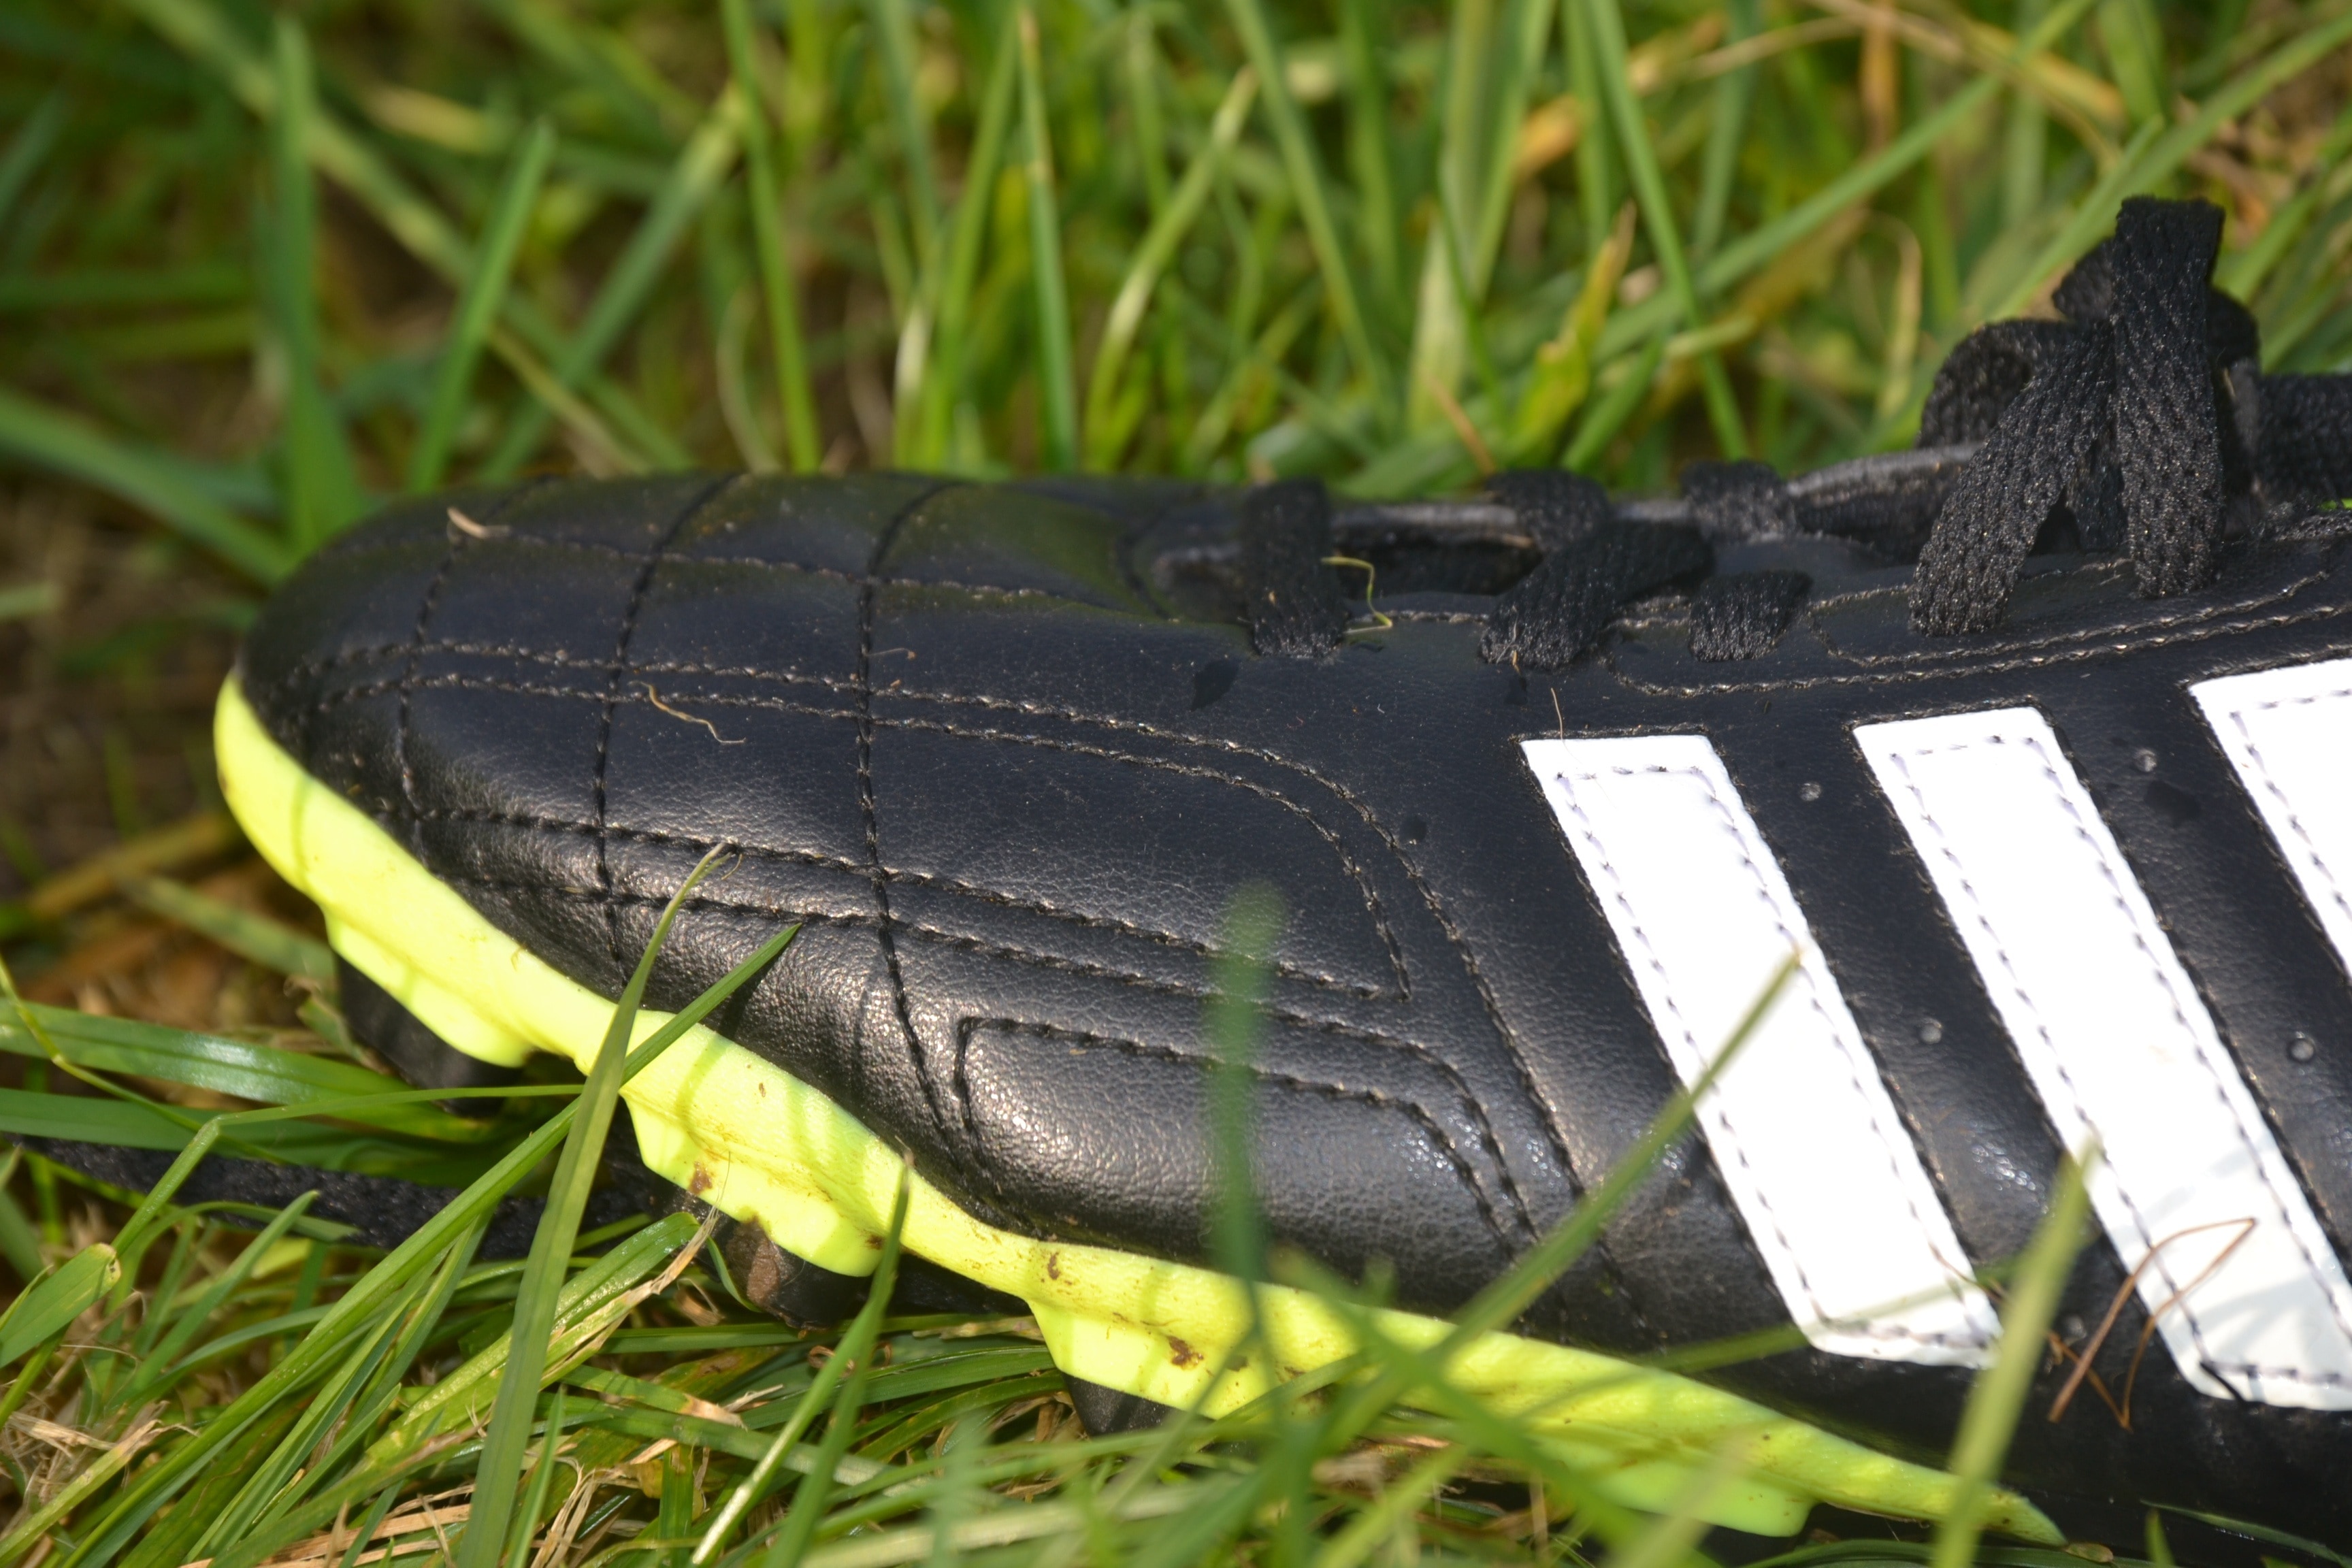 2560x1440 wallpaper | black and white adidas cleats | Peakpx